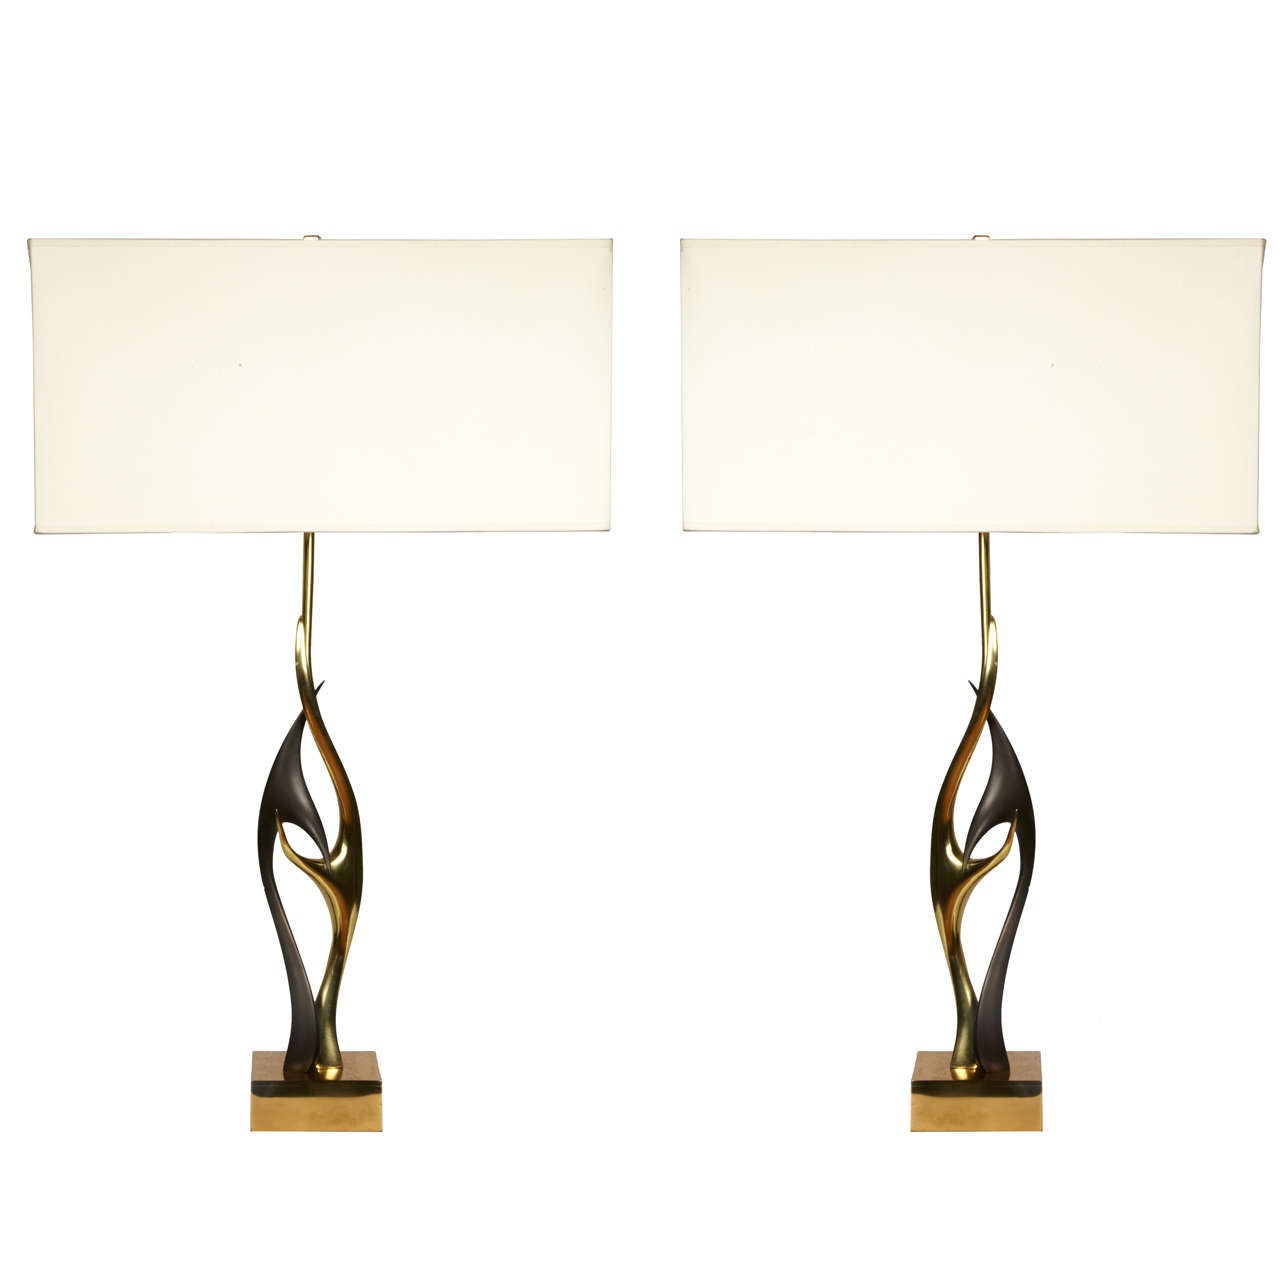 Pair of Sculptural Bronze Lamps by Willy Daro